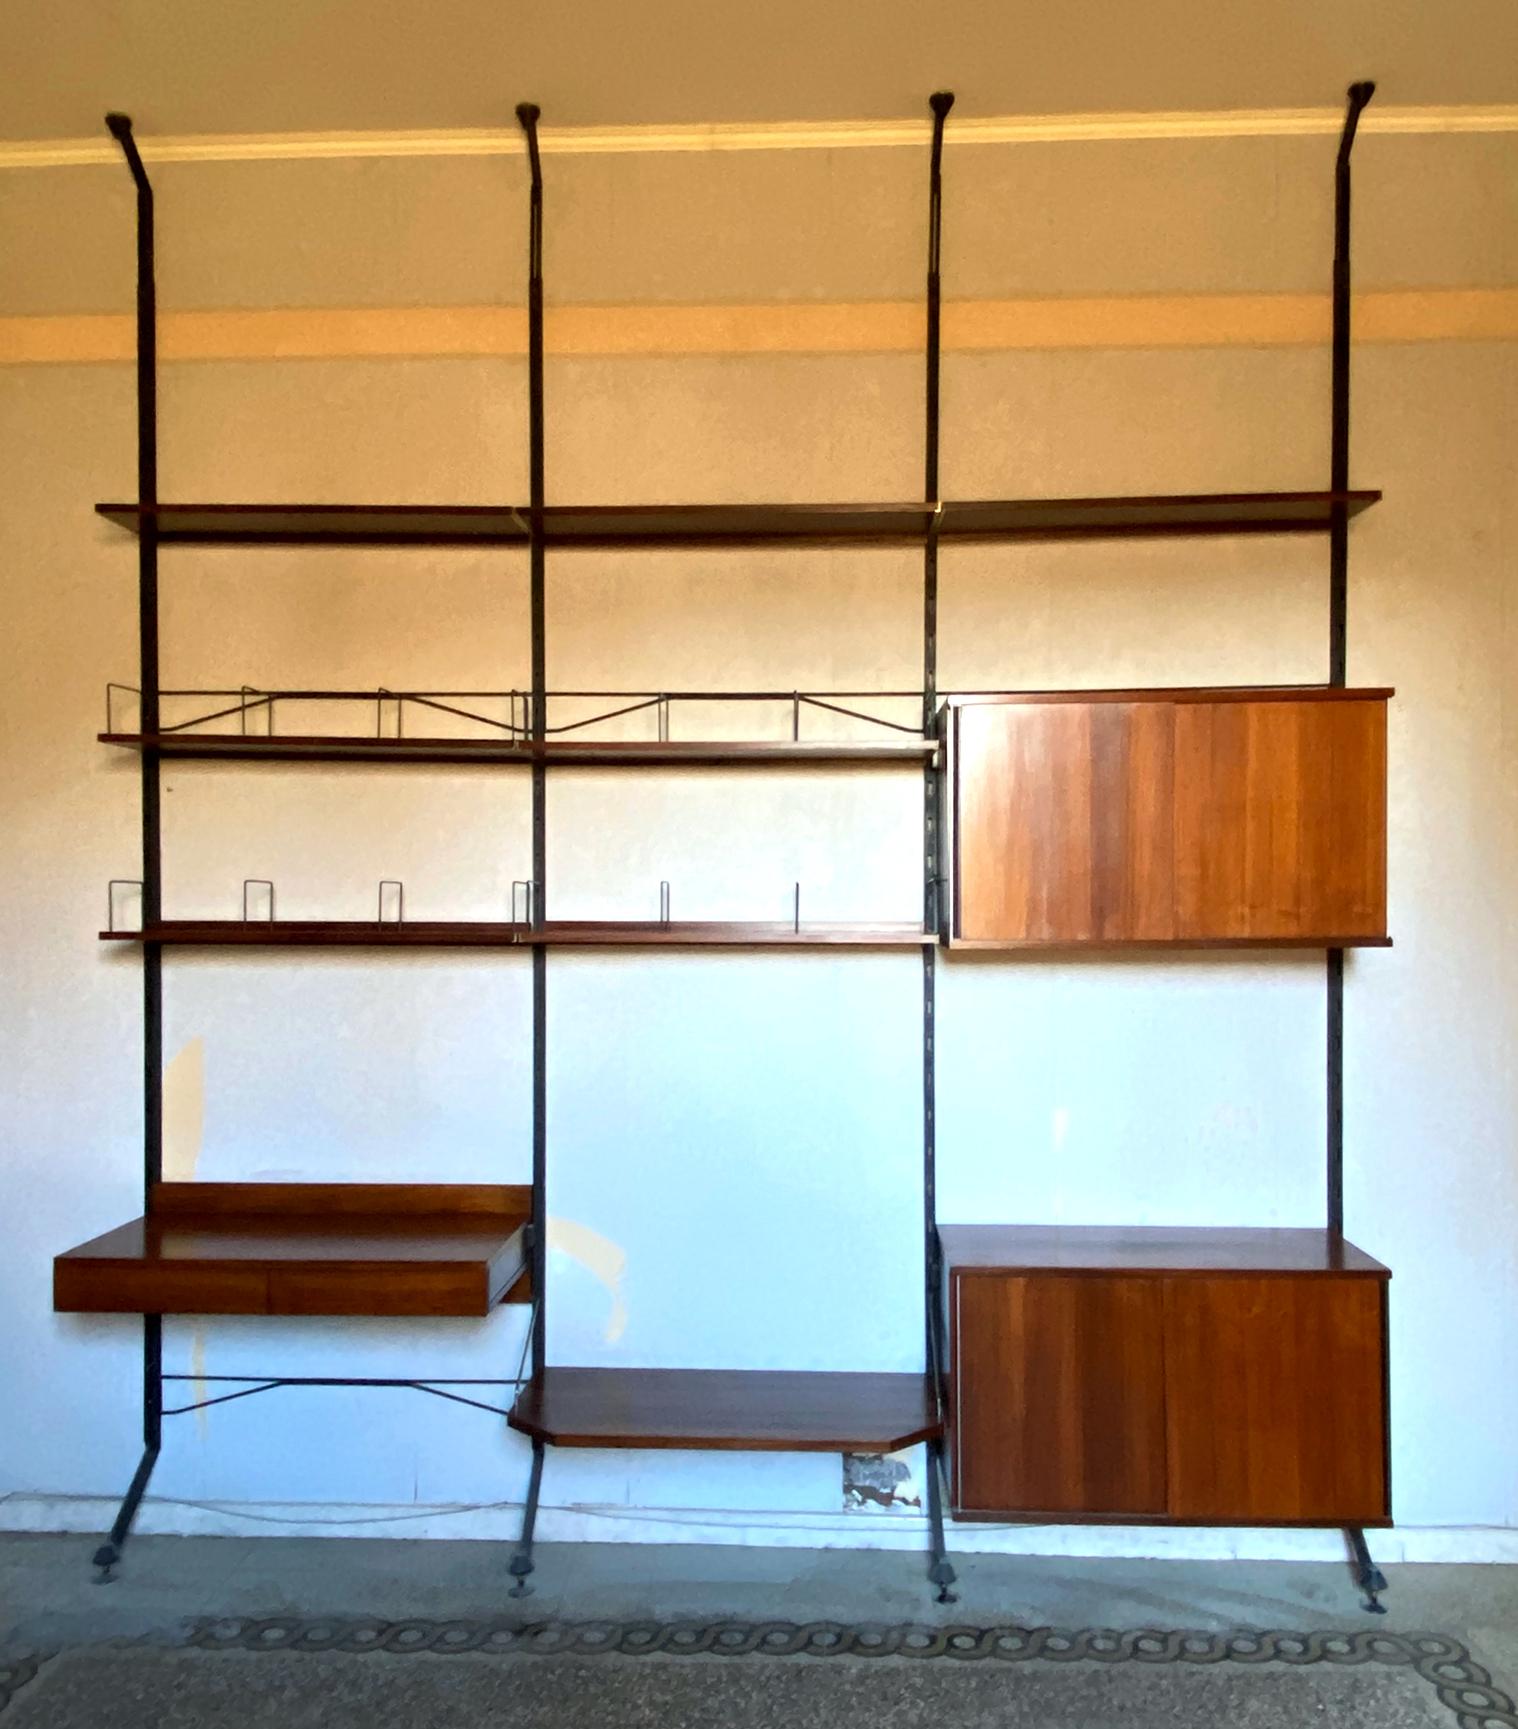 Designed by Ico Parisi 1958 for MiM, Rome. 
The bookcase consists of: Three sections, shelves, a desk with drawers, two closed cabinets, a larger shelf for a TV and several bookshelves with metal stands to keep the books standing straight. Metal tag